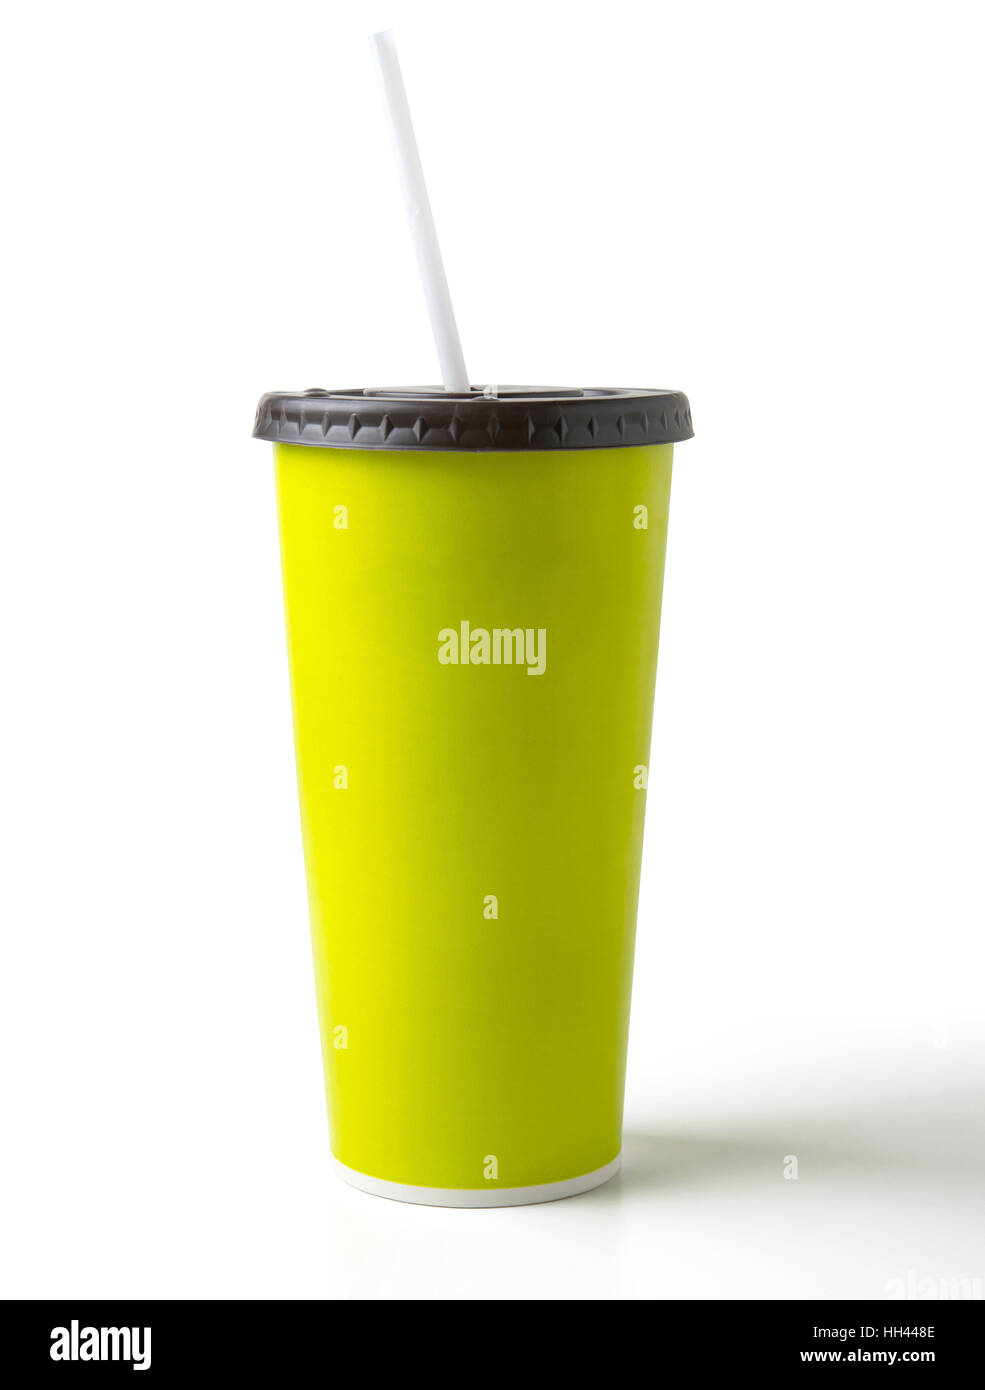 Green Paper Cup Stock Photos and Pictures - 93,776 Images